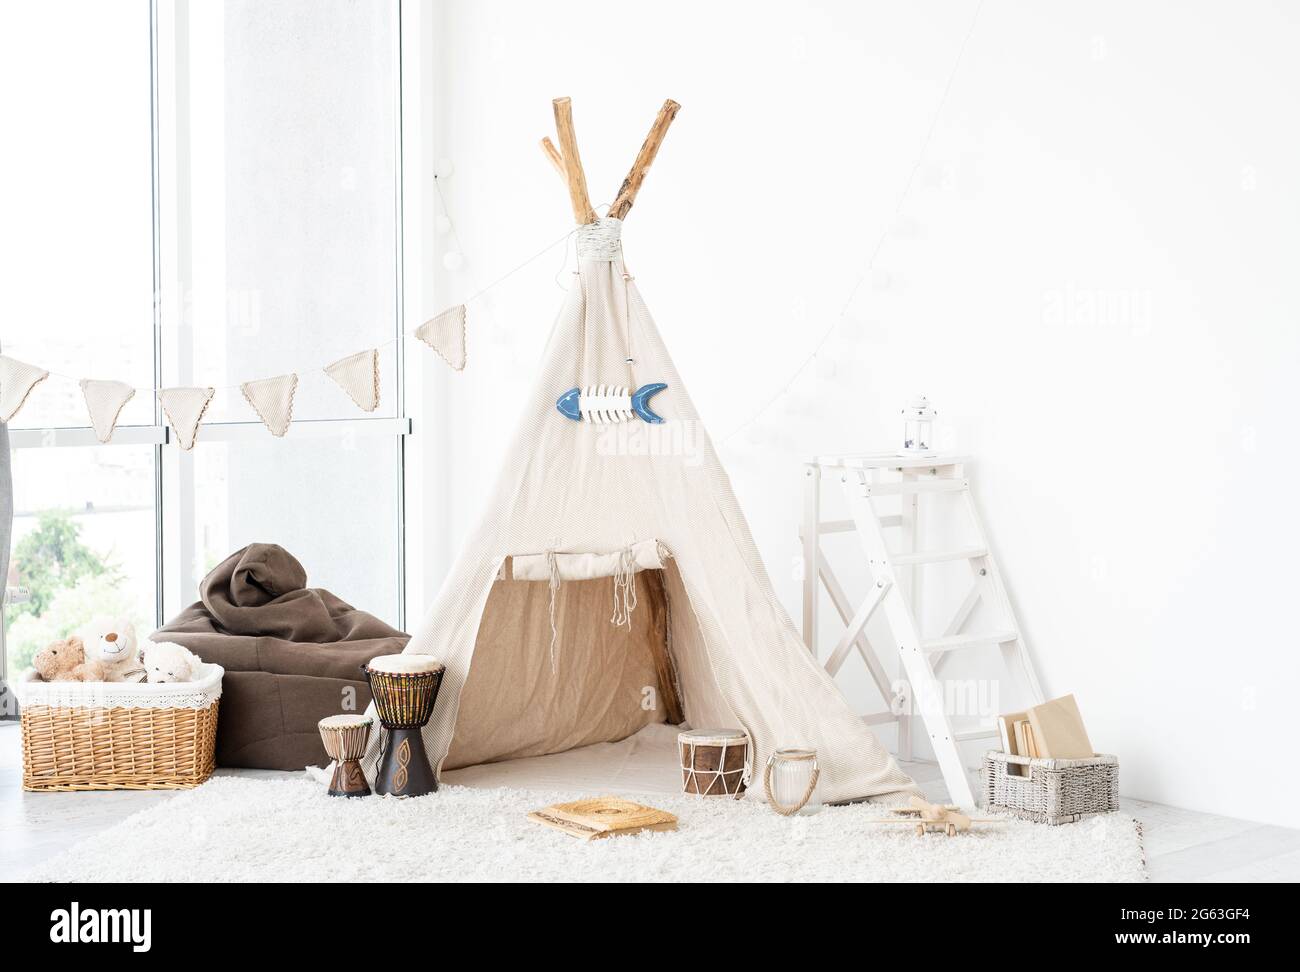 Kids room interior with wigwam, toys and djembe drums Stock Photo